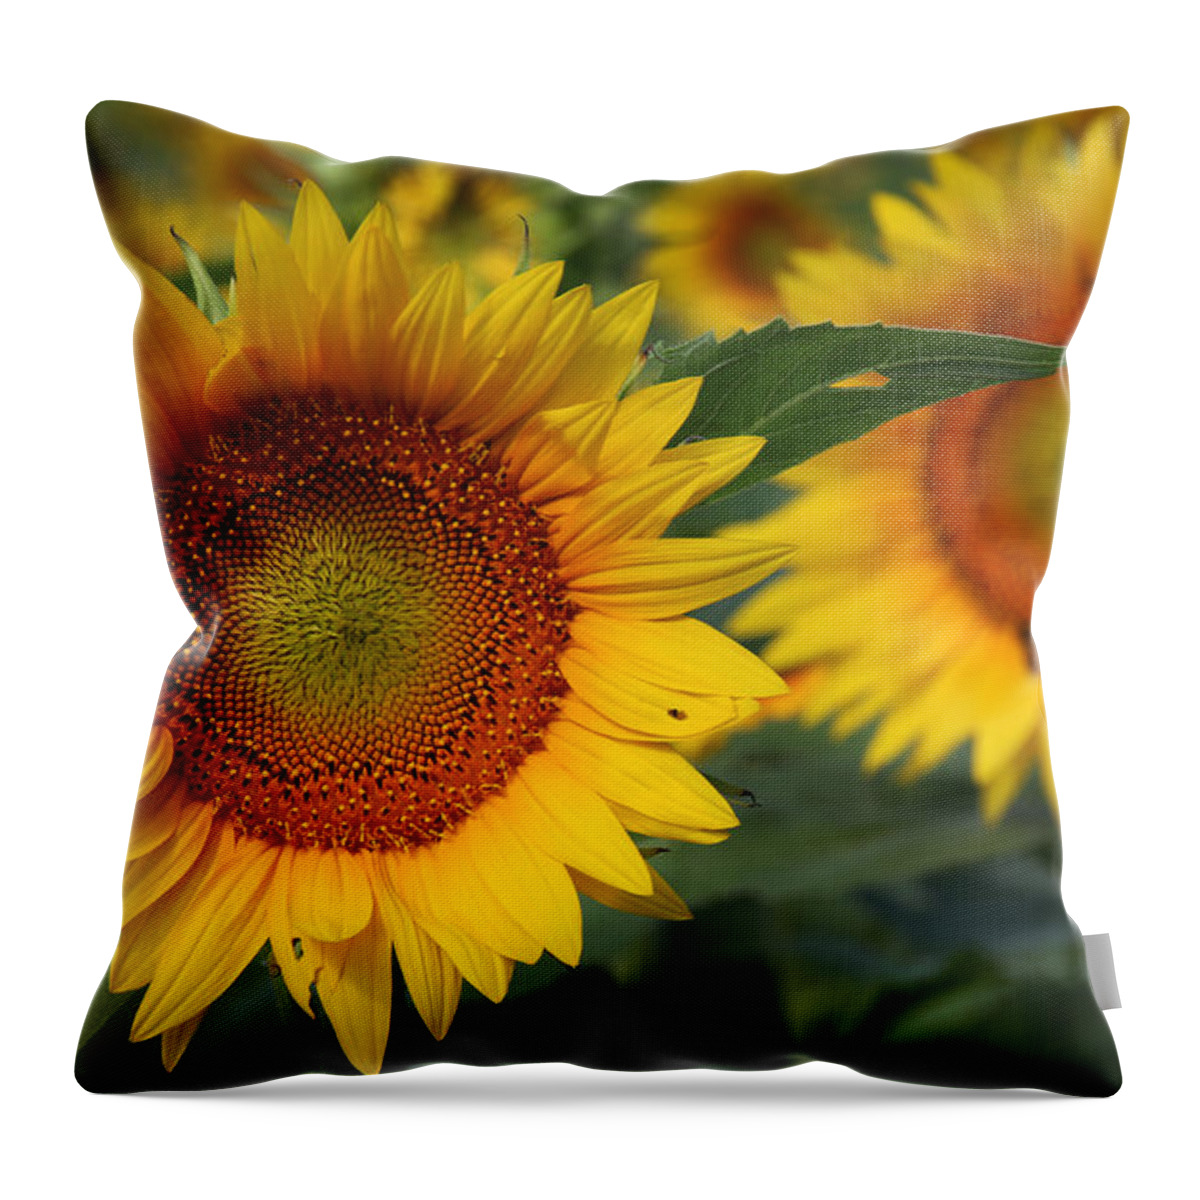 Sunflowers Throw Pillow featuring the photograph Kansas Sunflowers - 2597 by Gary Gingrich Galleries